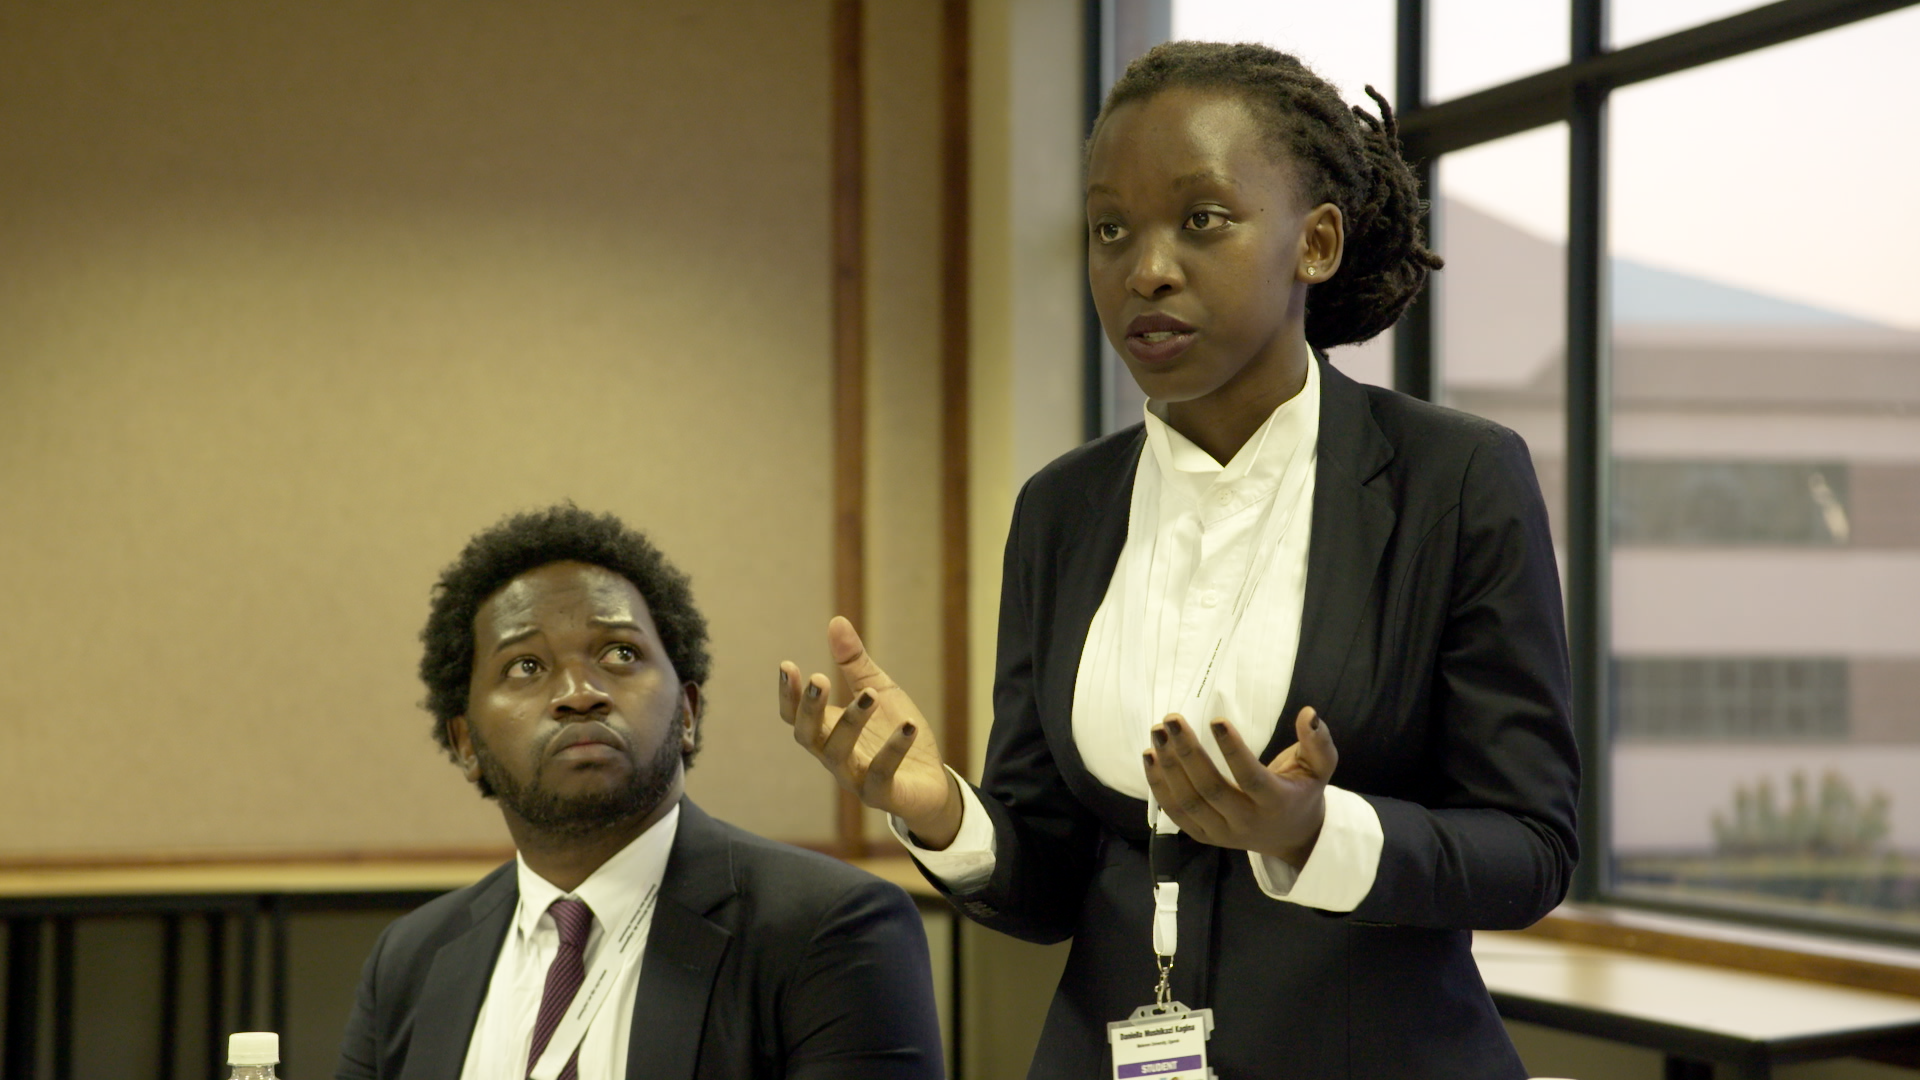 AfricanMoot5